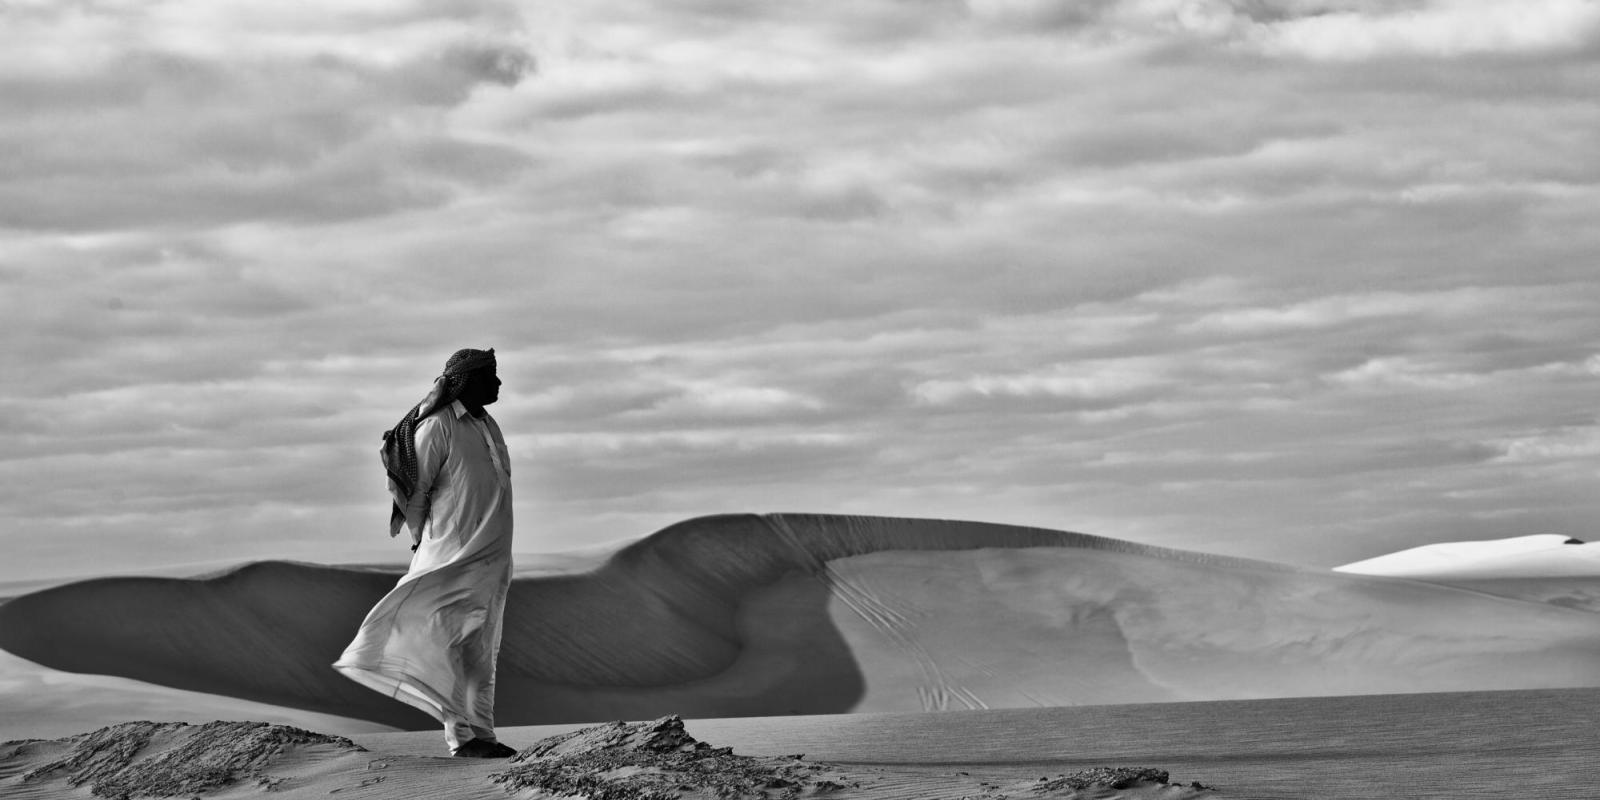 The Great Sand Sea, Siwa. Courtesy of the Photographic Gallery at the American University in Cairo